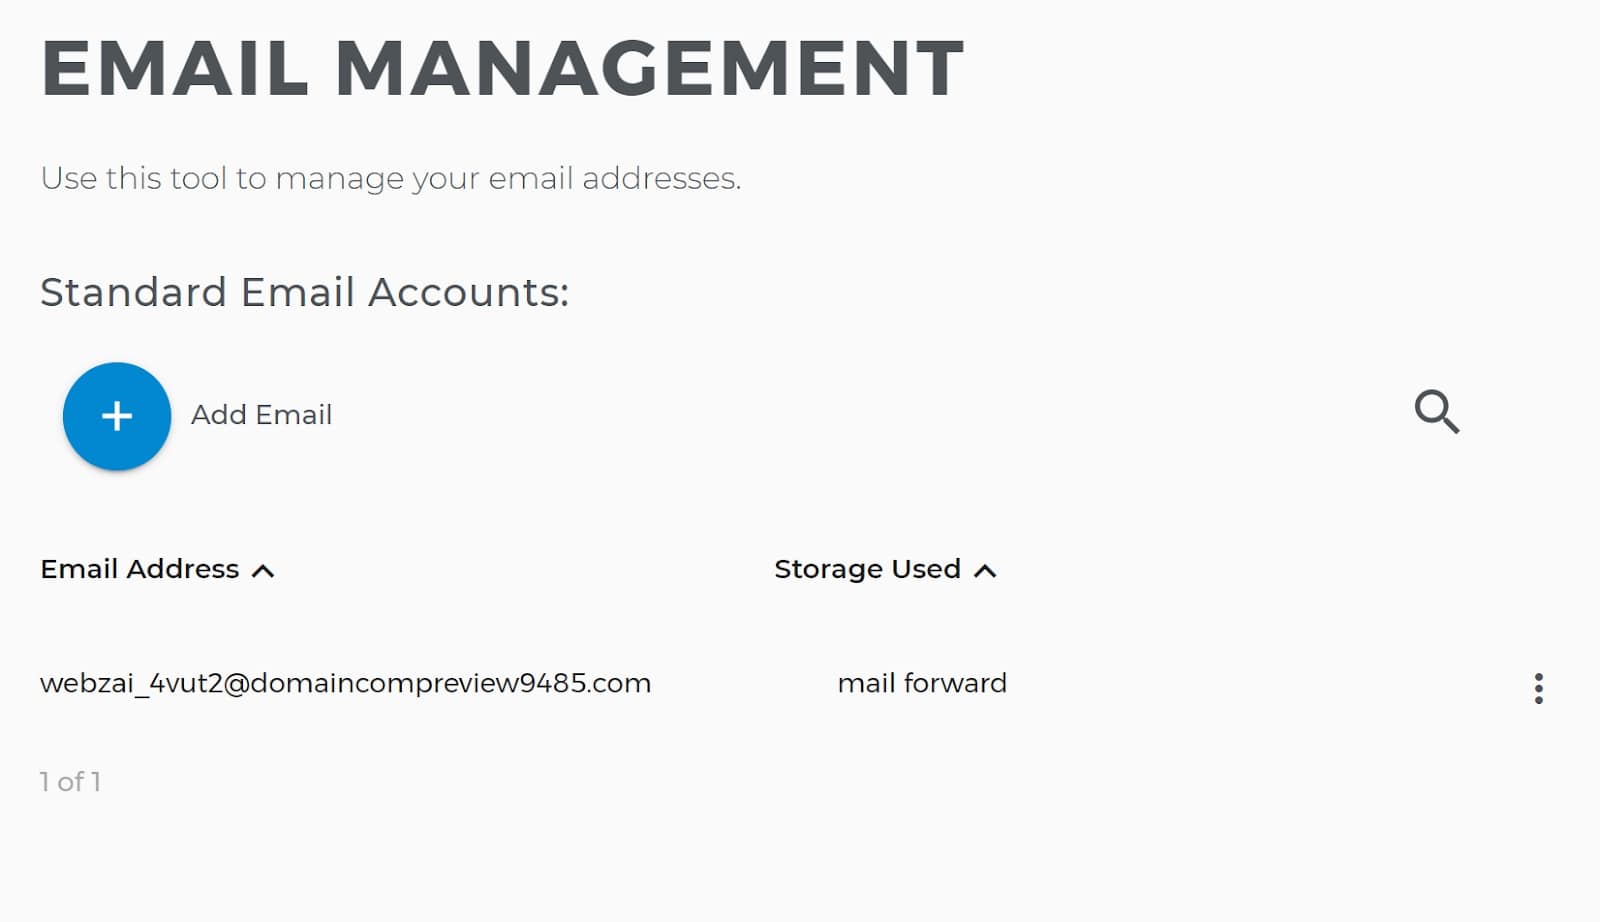 Domain.com's email management menu within its user interface